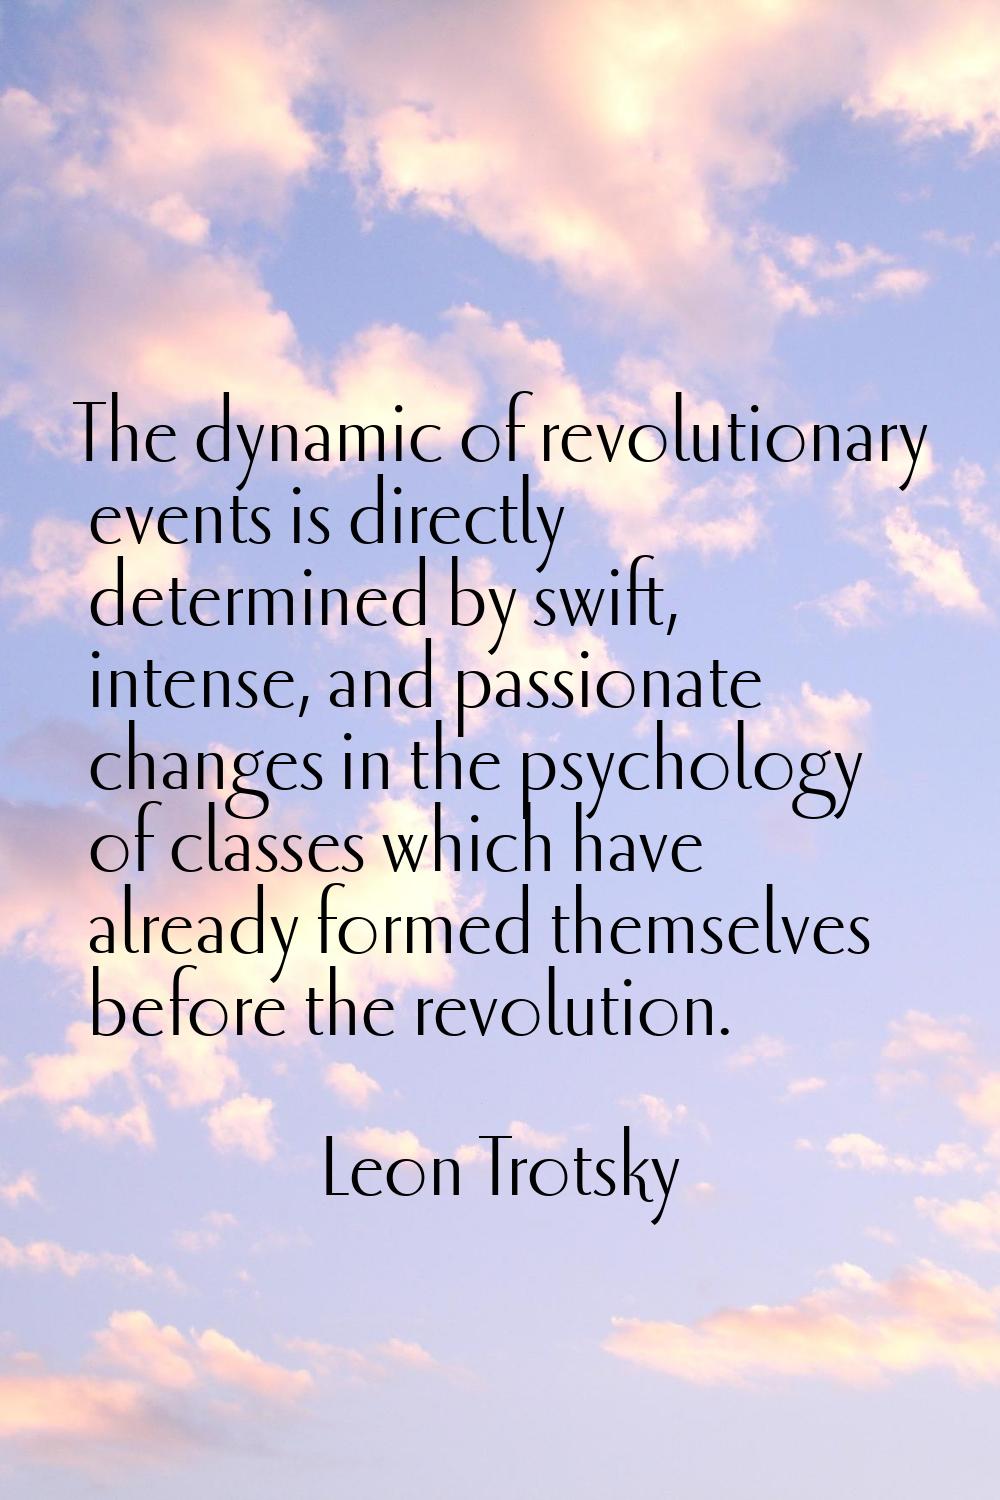 The dynamic of revolutionary events is directly determined by swift, intense, and passionate change